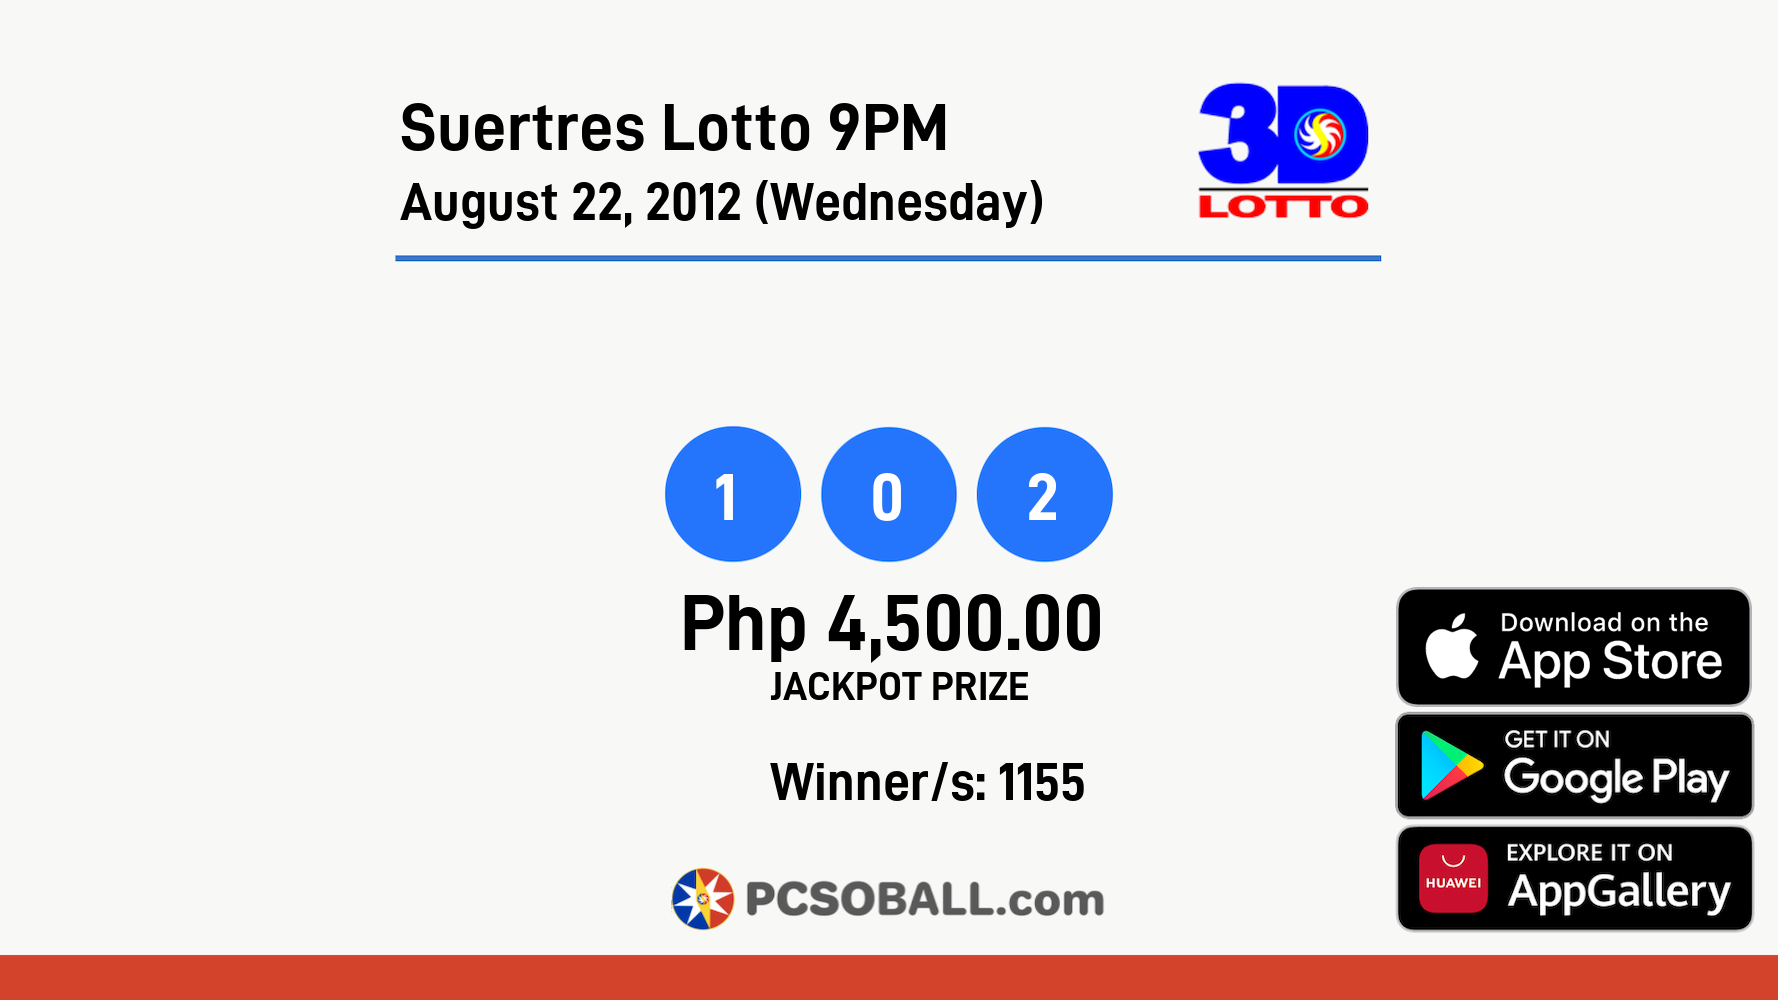 Suertres Lotto 9PM August 22, 2012 (Wednesday) Result